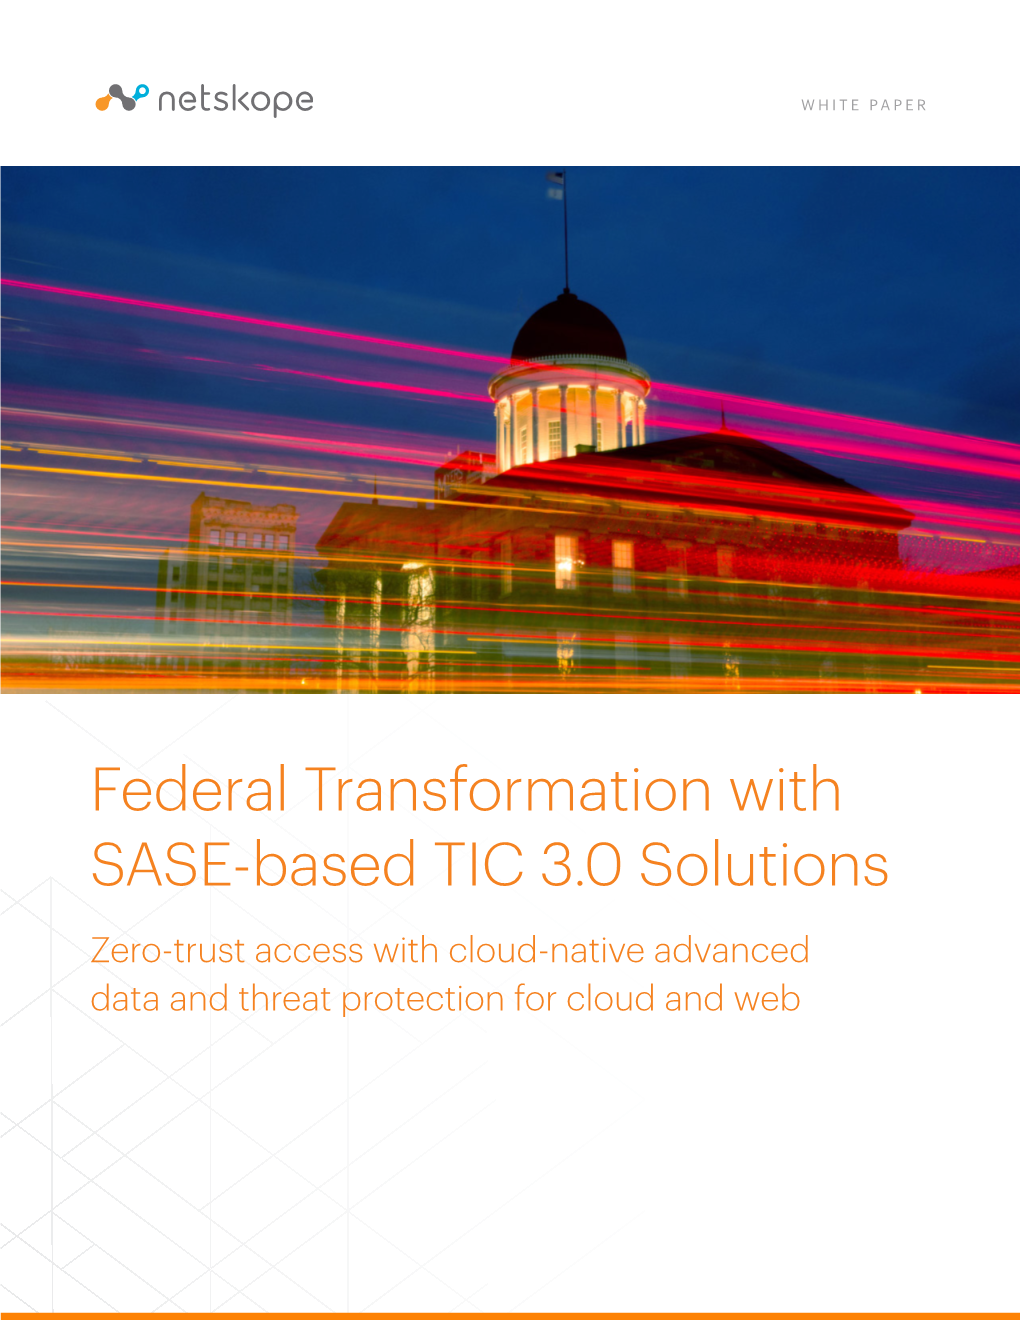 Federal Transformation with SASE-Based TIC 3.0 Solutions